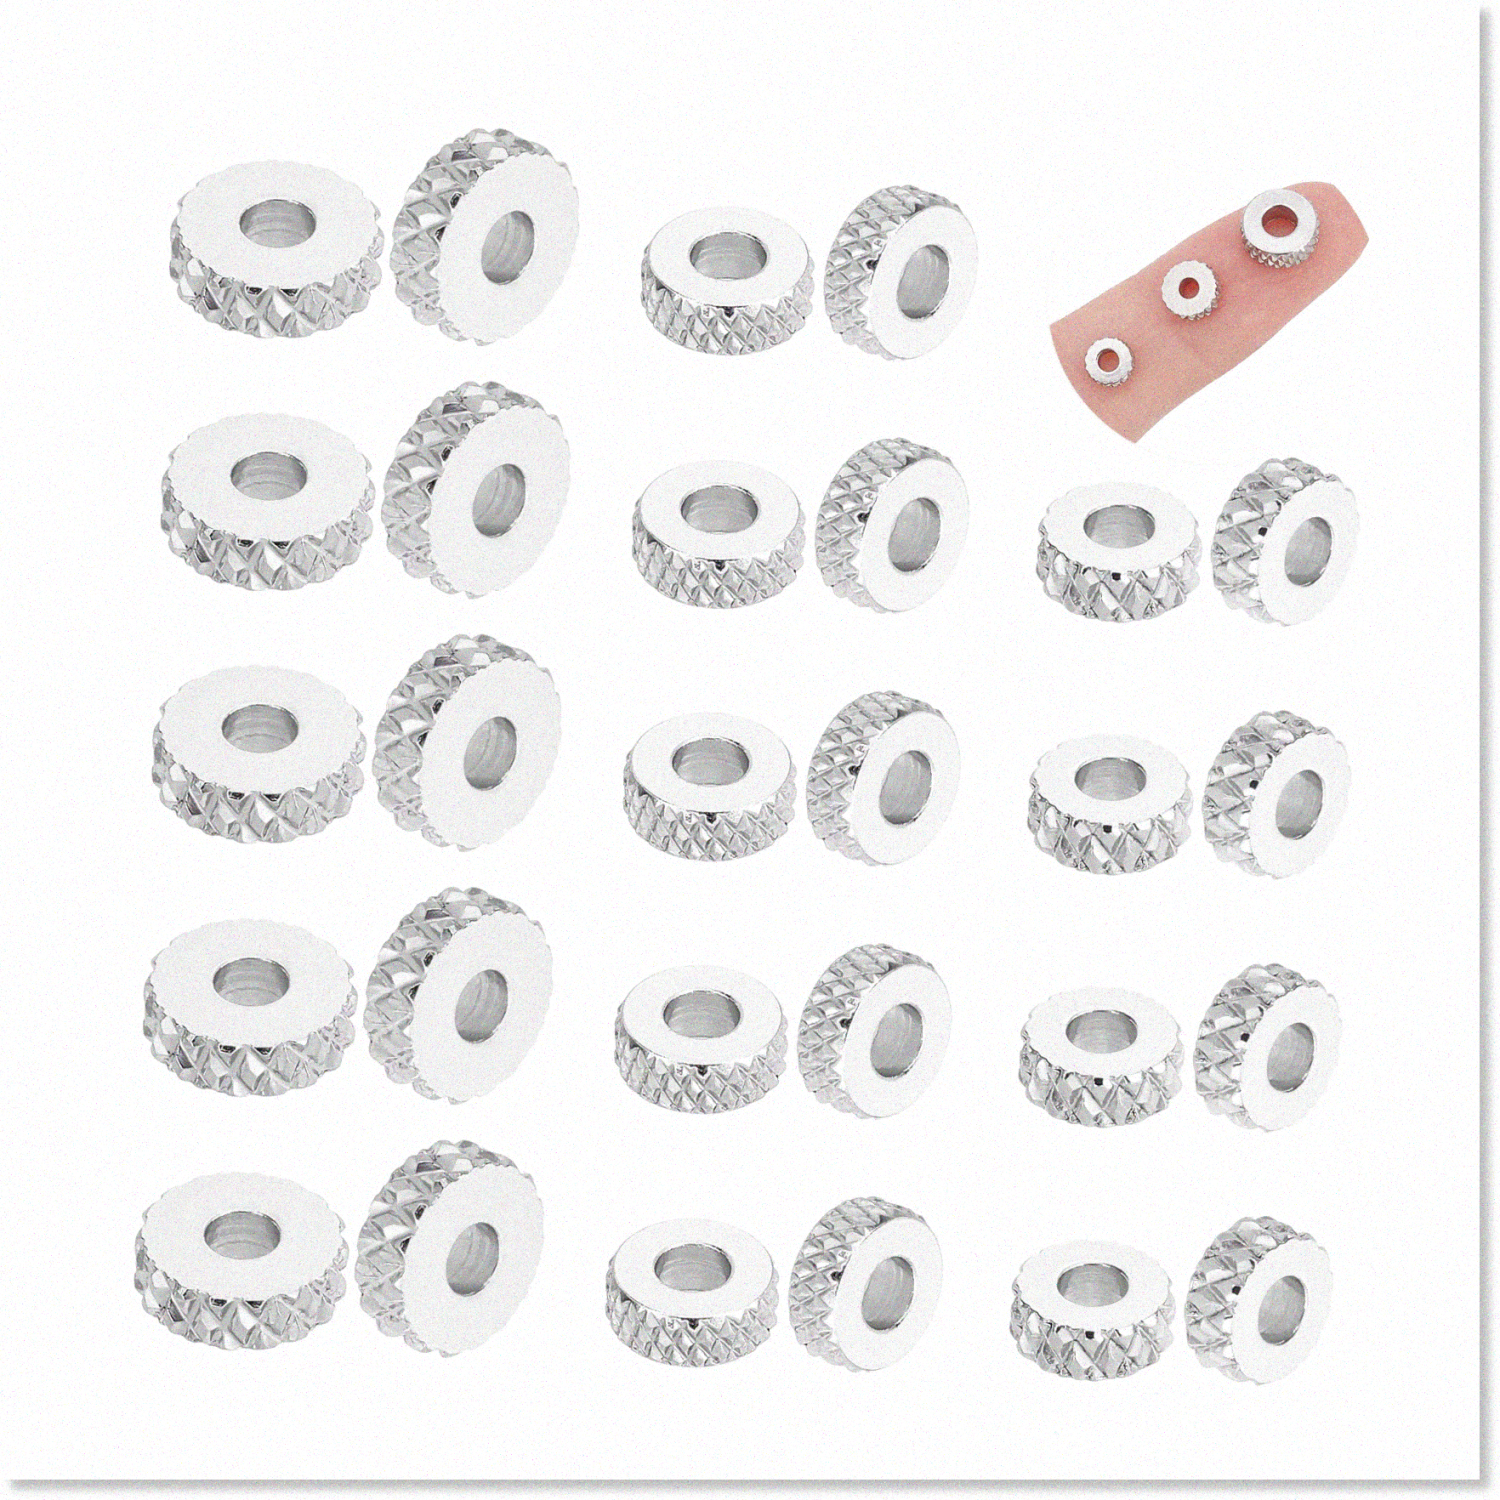 60Pcs Premium Stainless Steel Spacer Beads Set - 3 Styles 5/6/8mm Flat Round Beads with Diamond Texture - Durable Metal Findings with 2mm Hole - Ideal for Jewelry Making, Bracelets